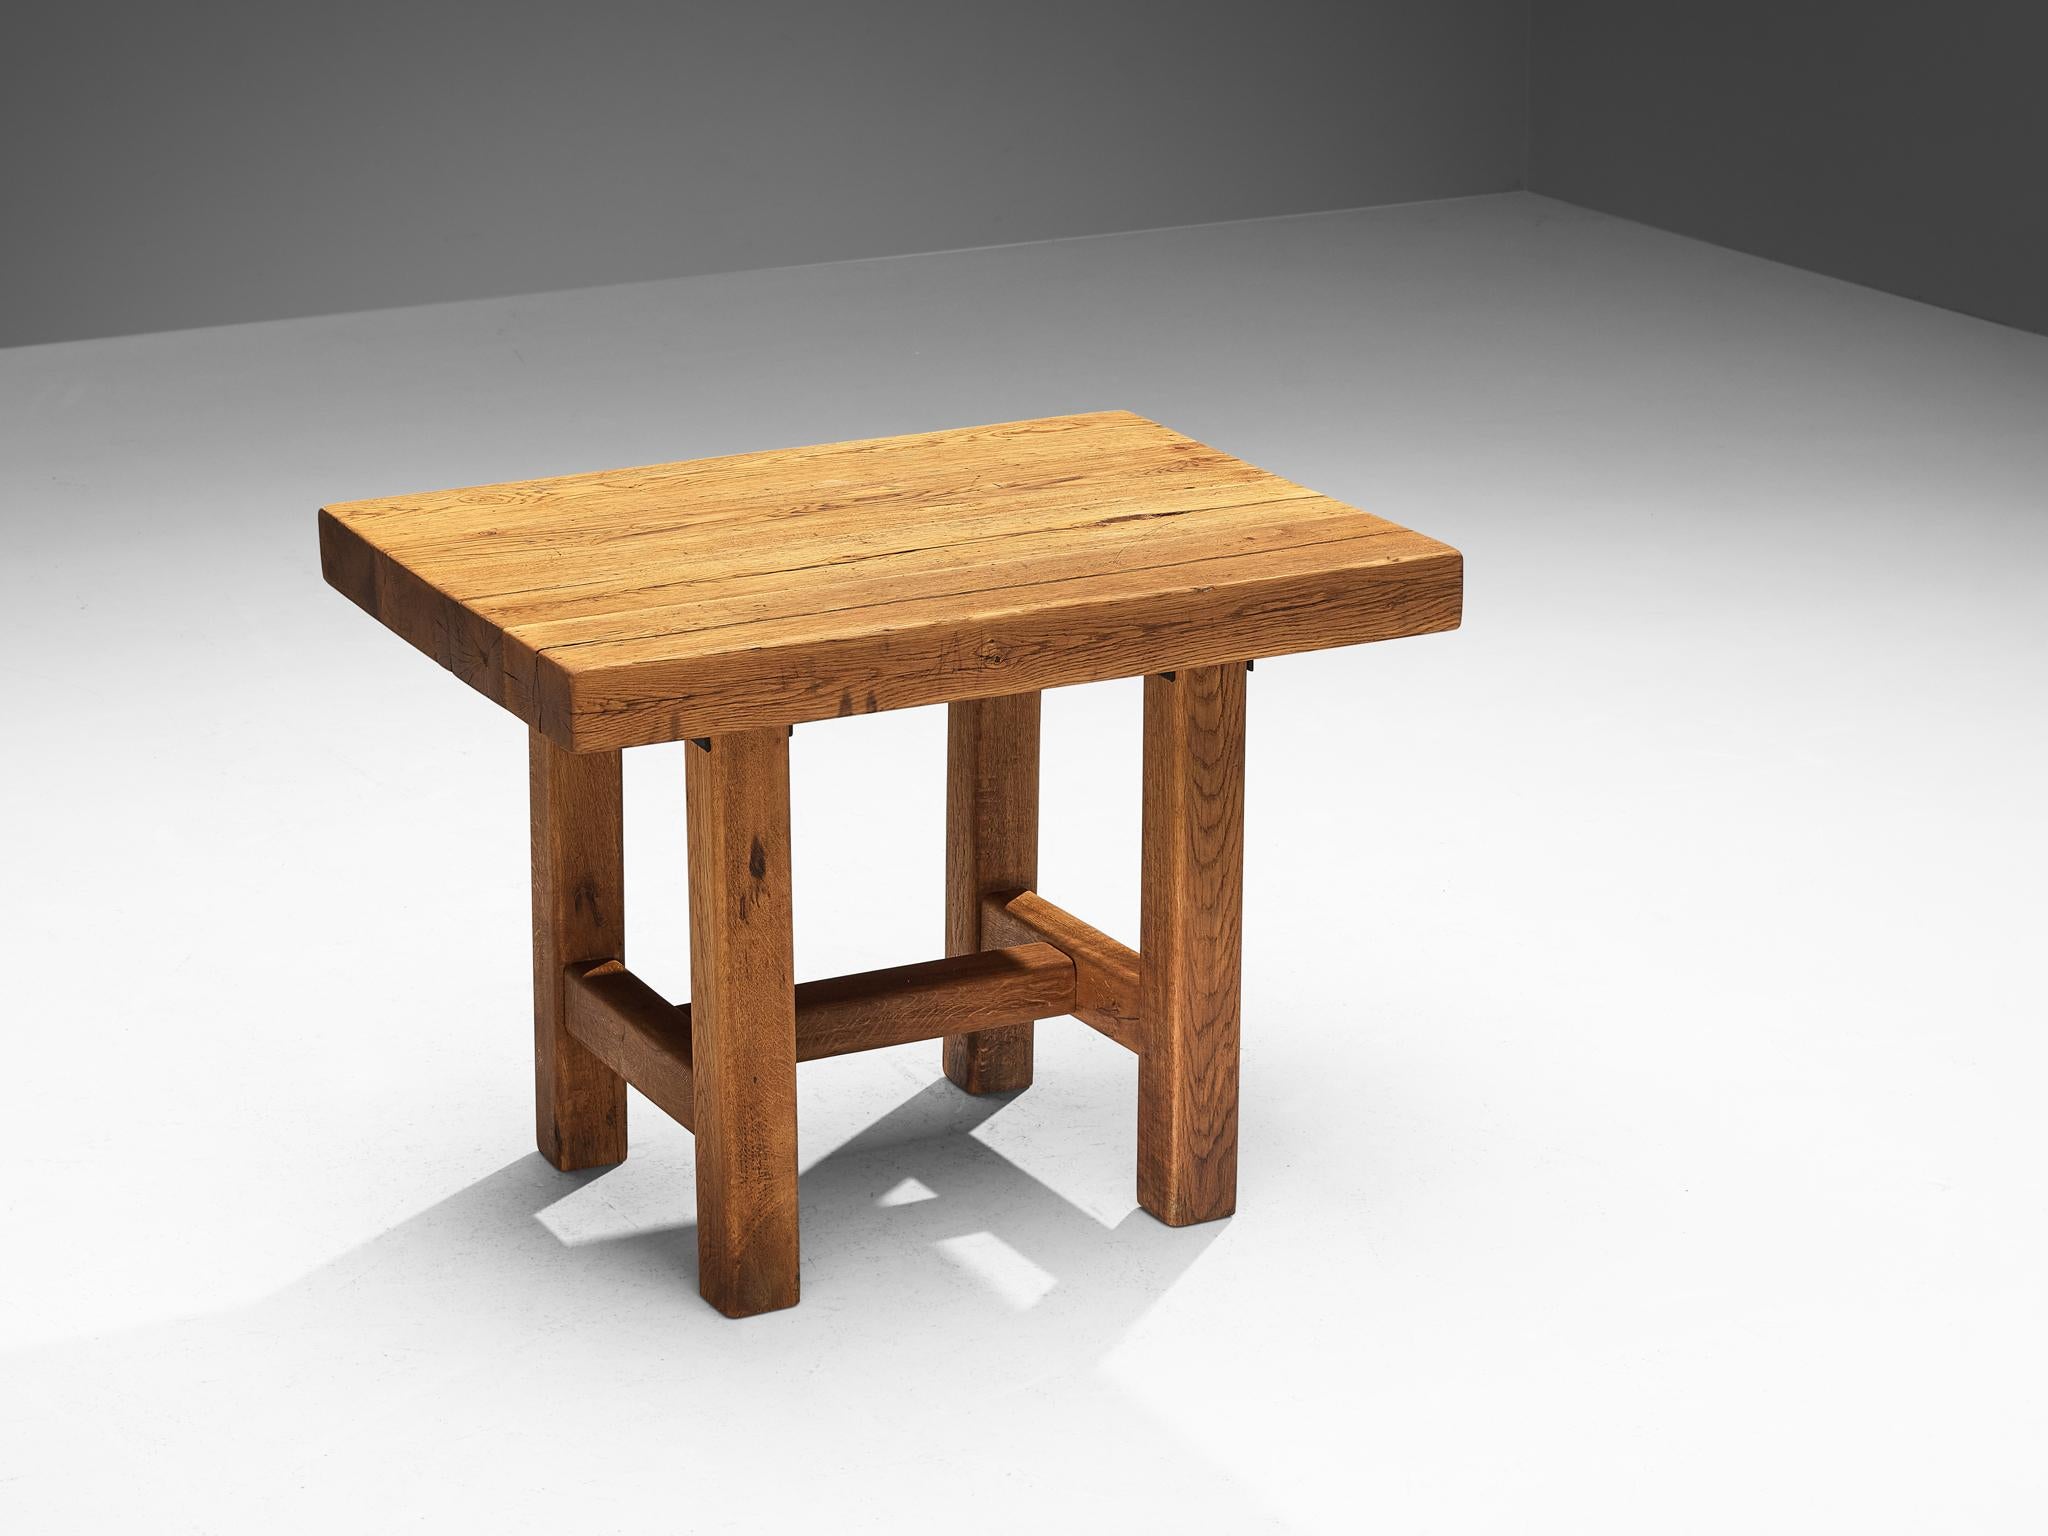 Mobichalet, dining table, oak, Belgium, 1950s

This rustic table will come forward nicely in a relaxing atmosphere, like a patio or a studio space. The brutalist appearance is expressed through robust forms and strong lines. The viewer can follow